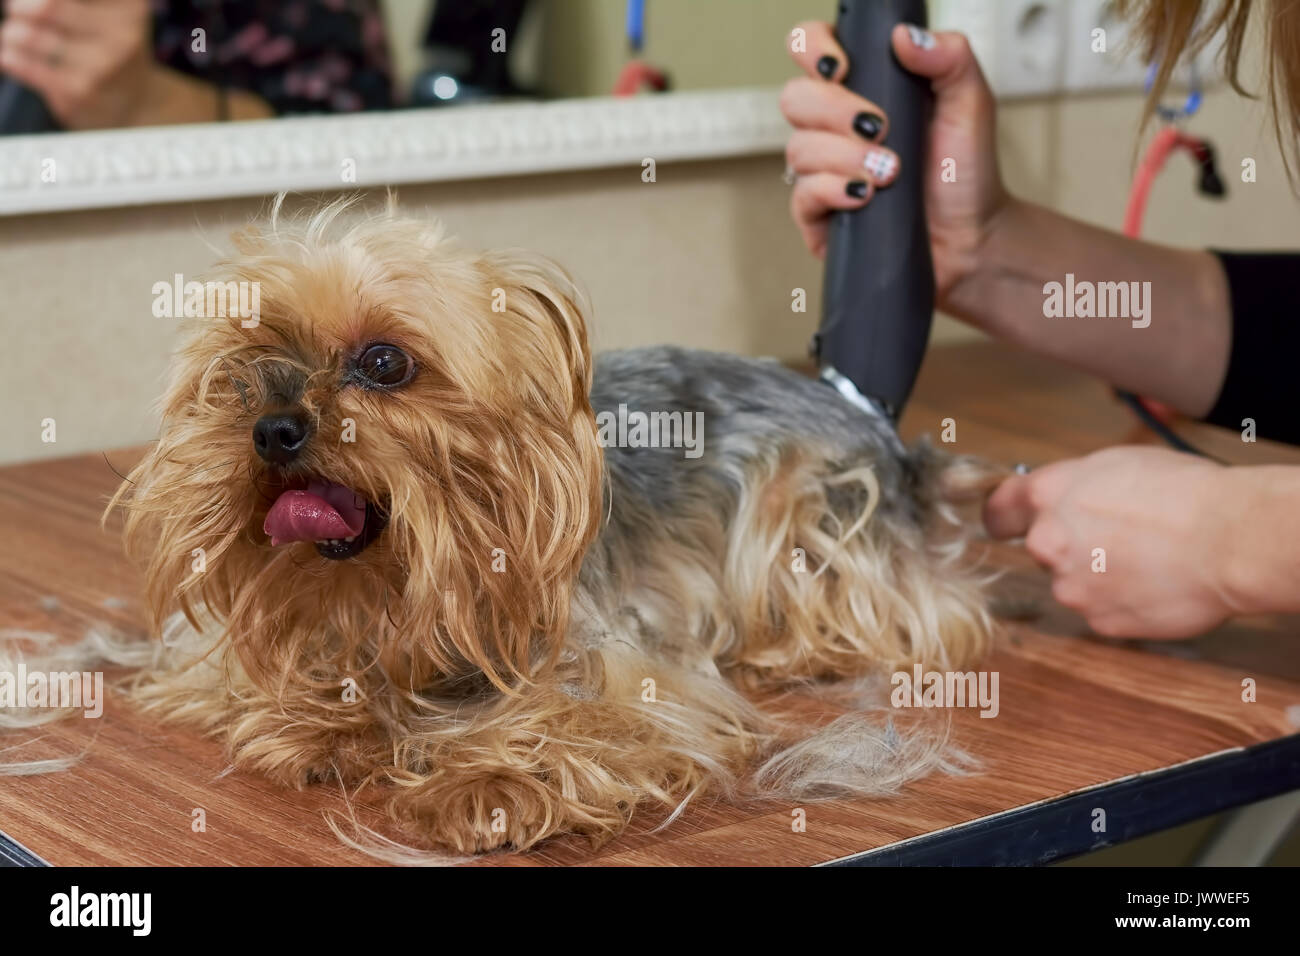 York terrier at the groomer. Cute dog getting haircut. Stock Photo